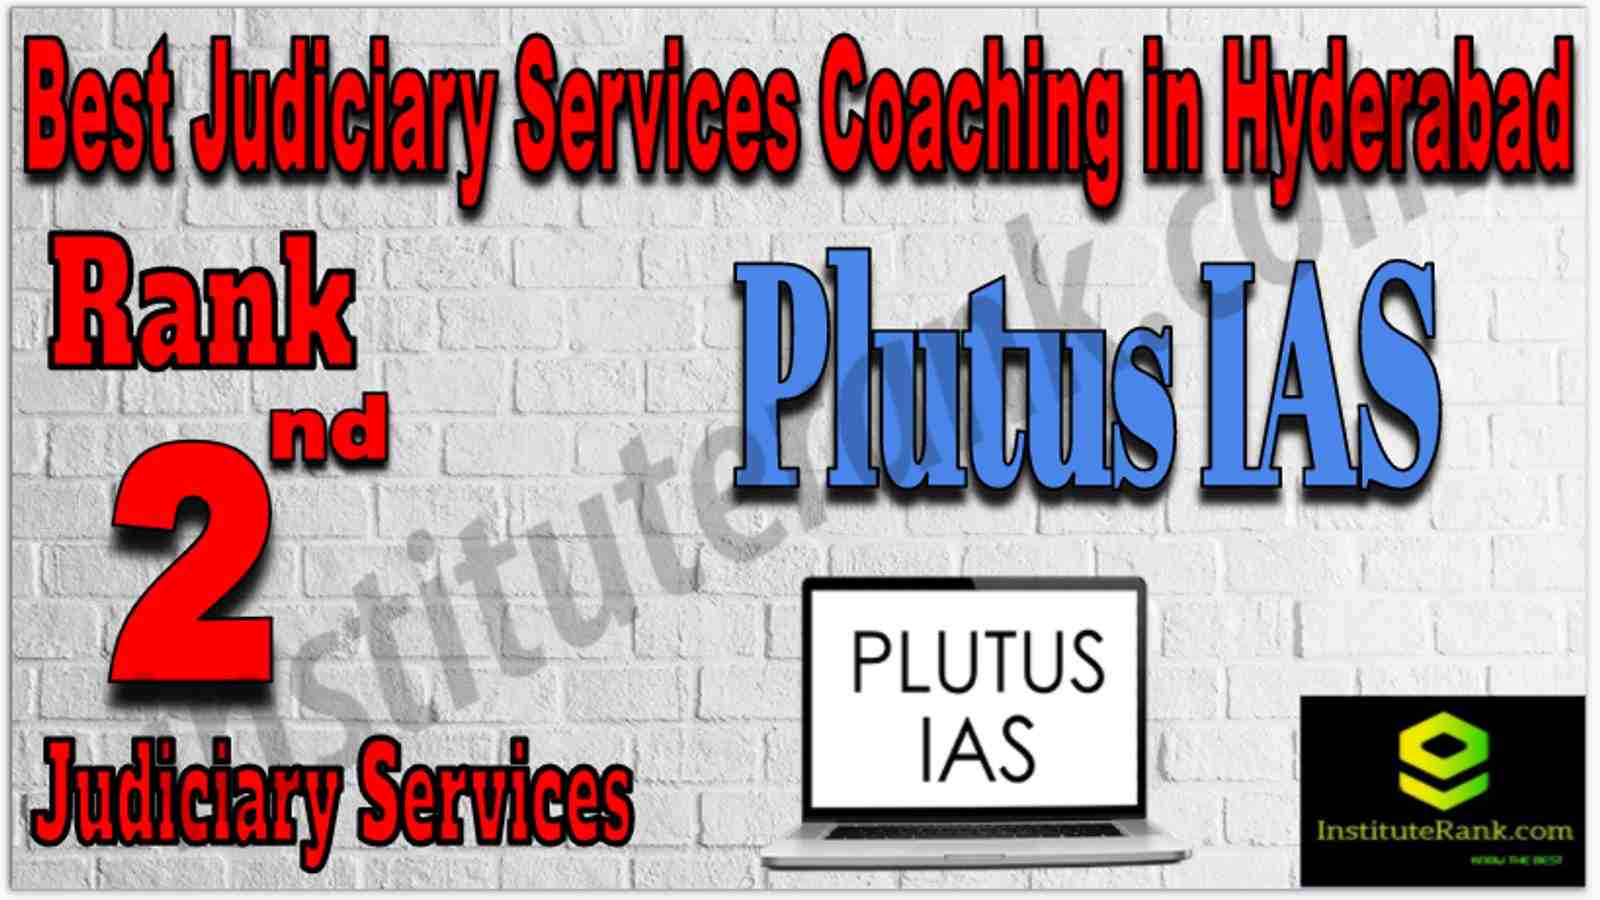 Rank 2 Best Judiciary Services Coaching in Hyderabad